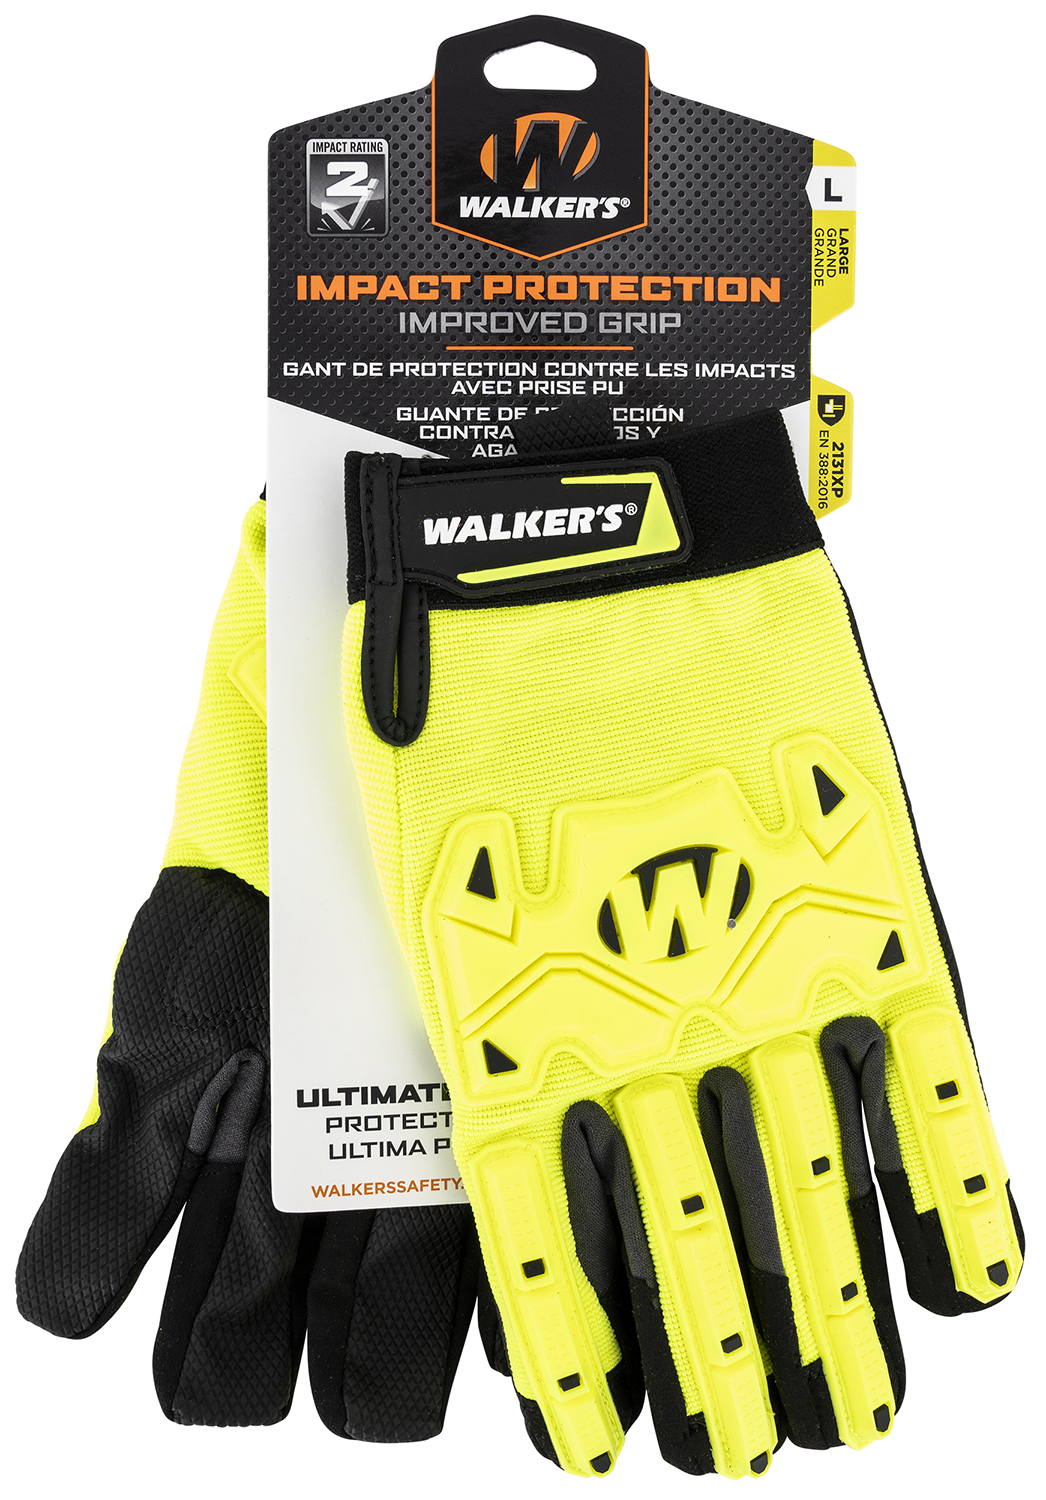 Walkers GWPSFHVFFPUIL2SM Cold Weather Impact Protection Black/Yellow Synthetic Leather Small